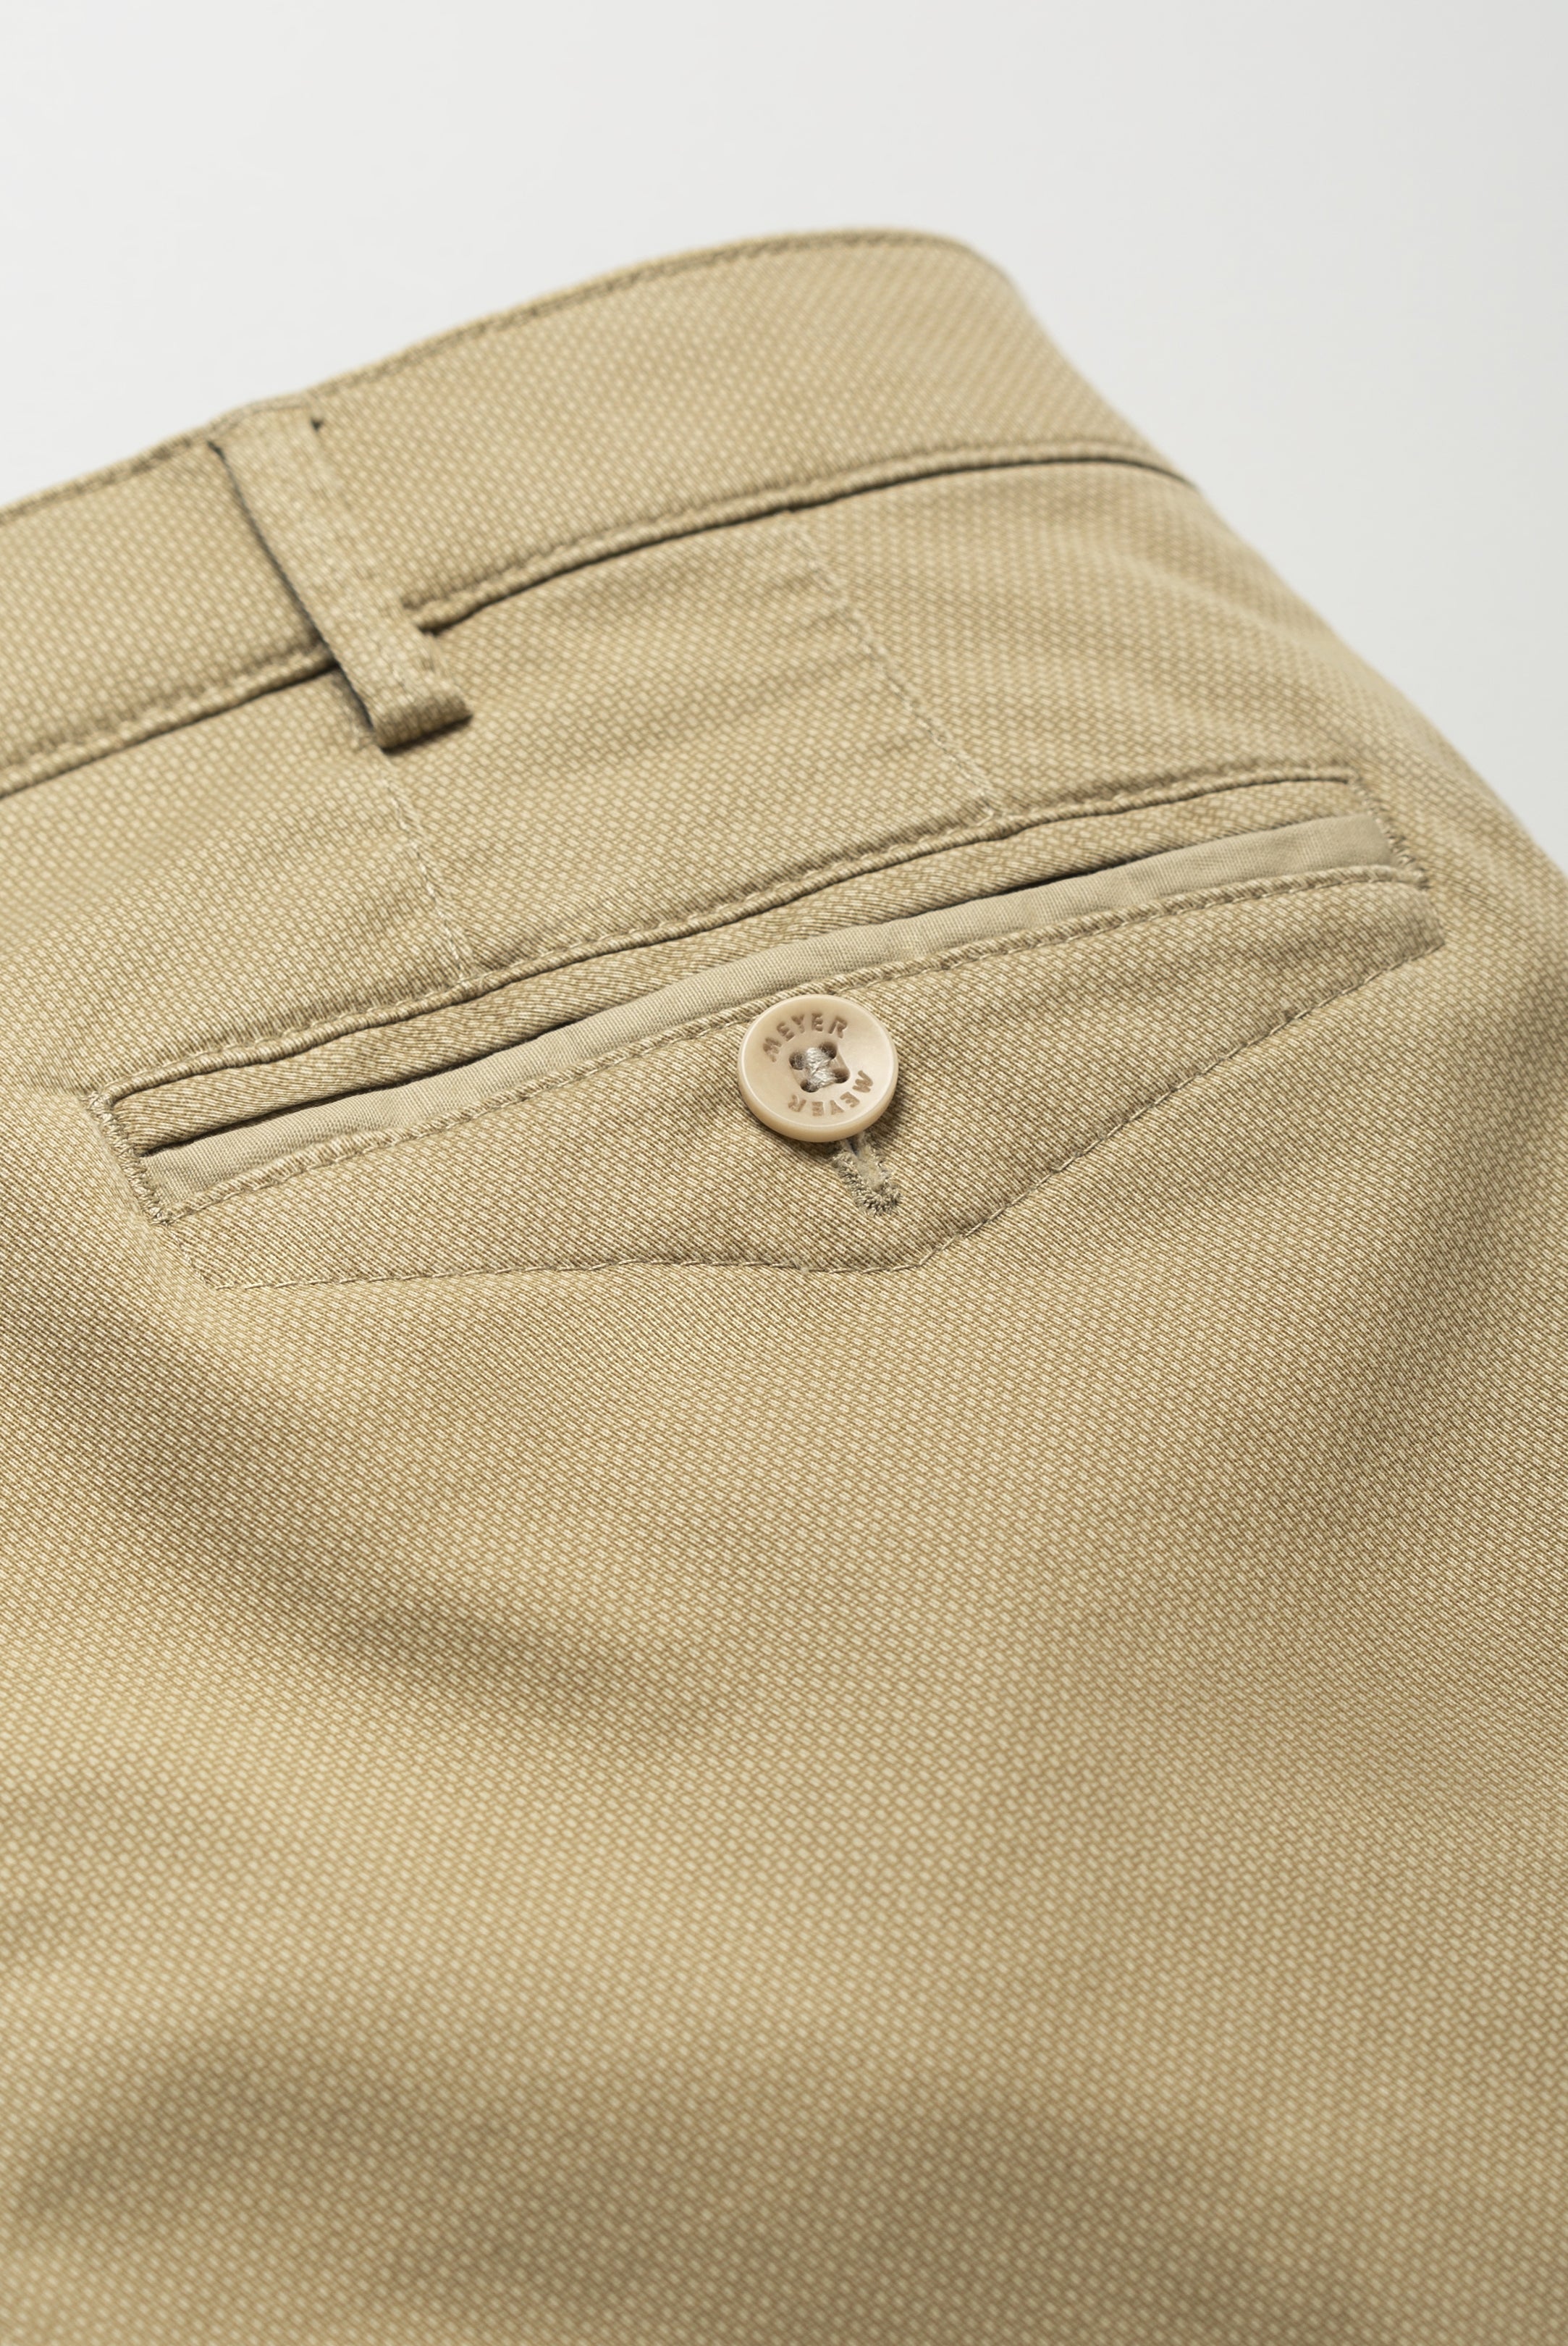 MEYER Trousers - Chicago 5056 Lightweight Micro Print Chinos - Sand